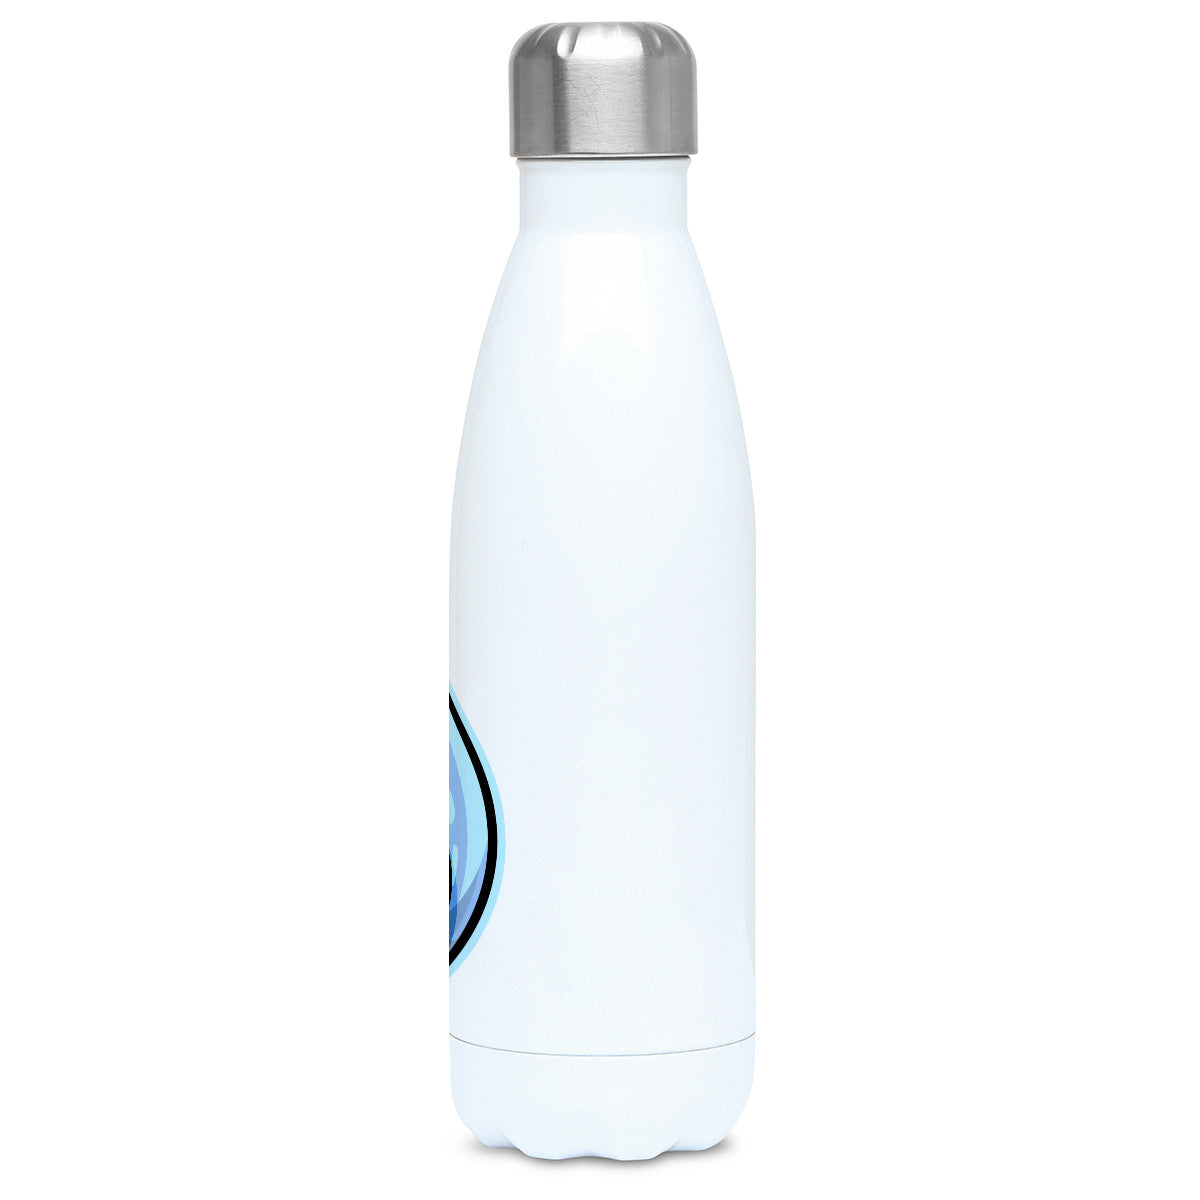 Kawaii cute blue droplet of water design on a white metal insulated drinks bottle, side view